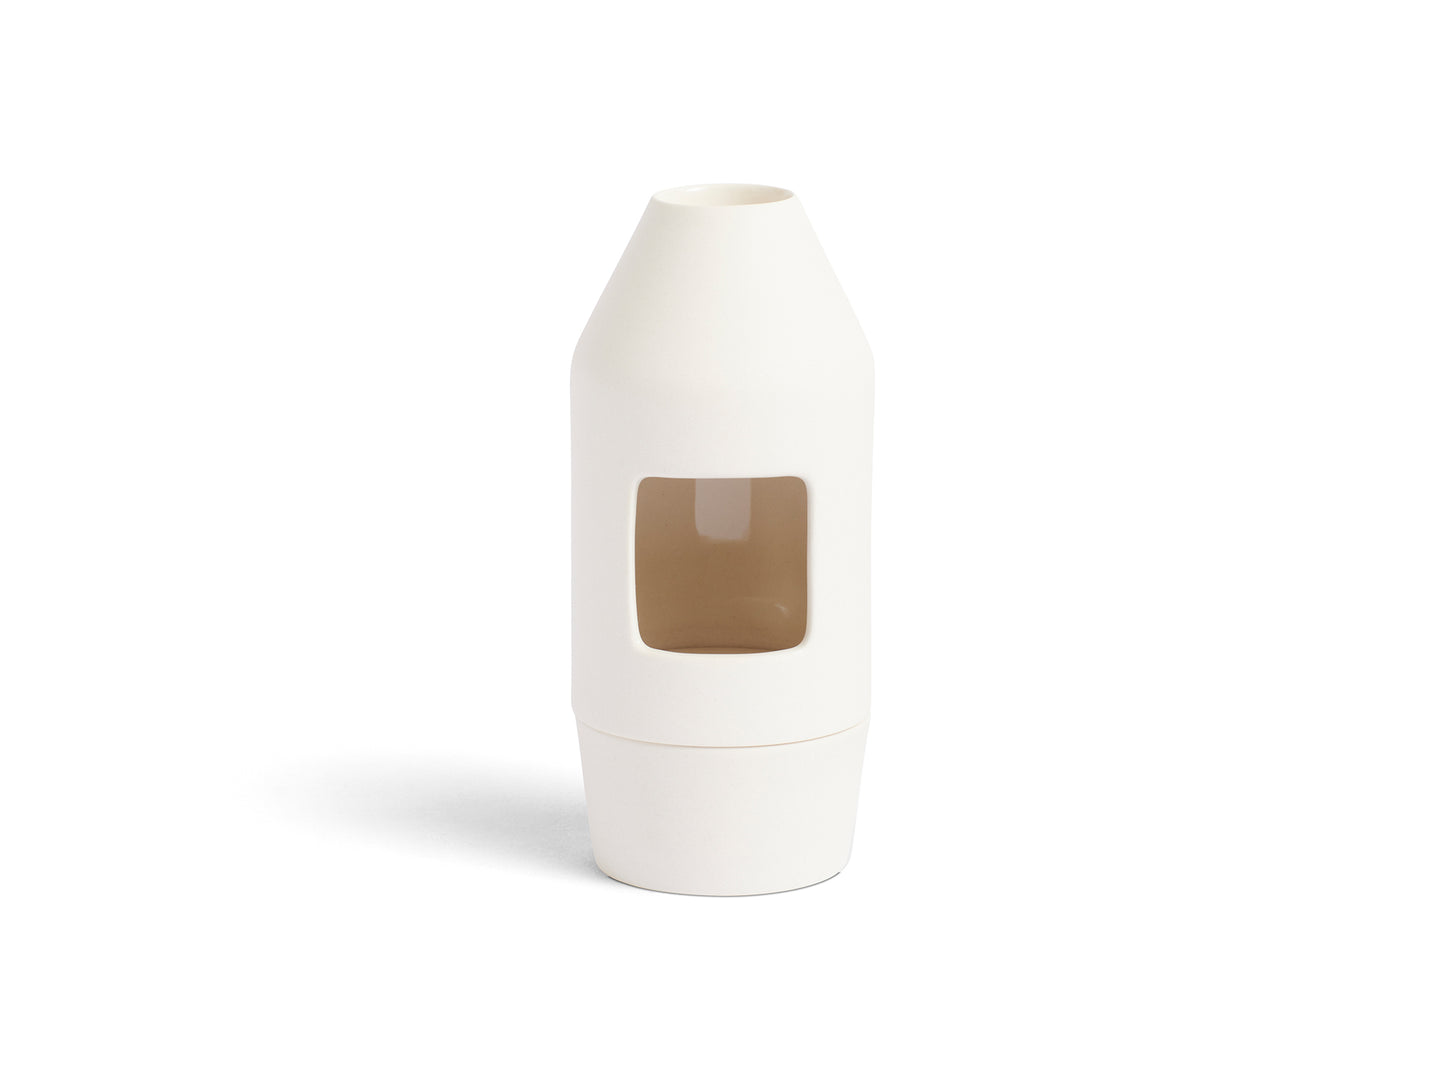 Off White Chim Chim Scent Diffuser by HAY